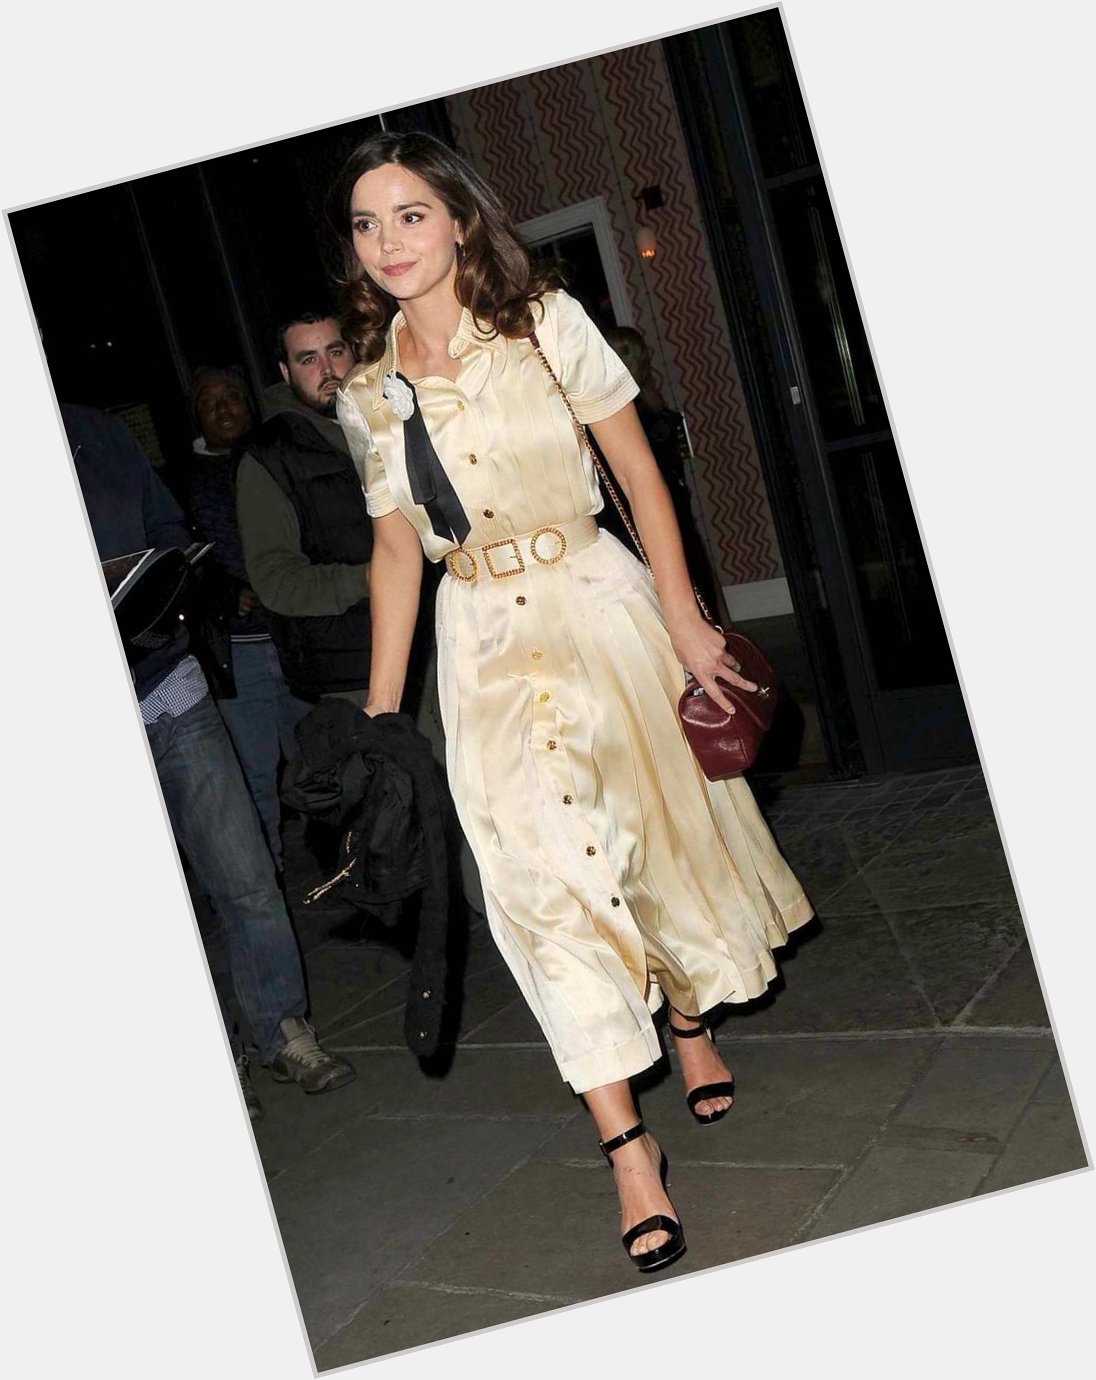 **Happy 33rd Birthday Jenna Coleman**
[at Ham Yard Hotel in London, England on Tuesday 23rd of April] 